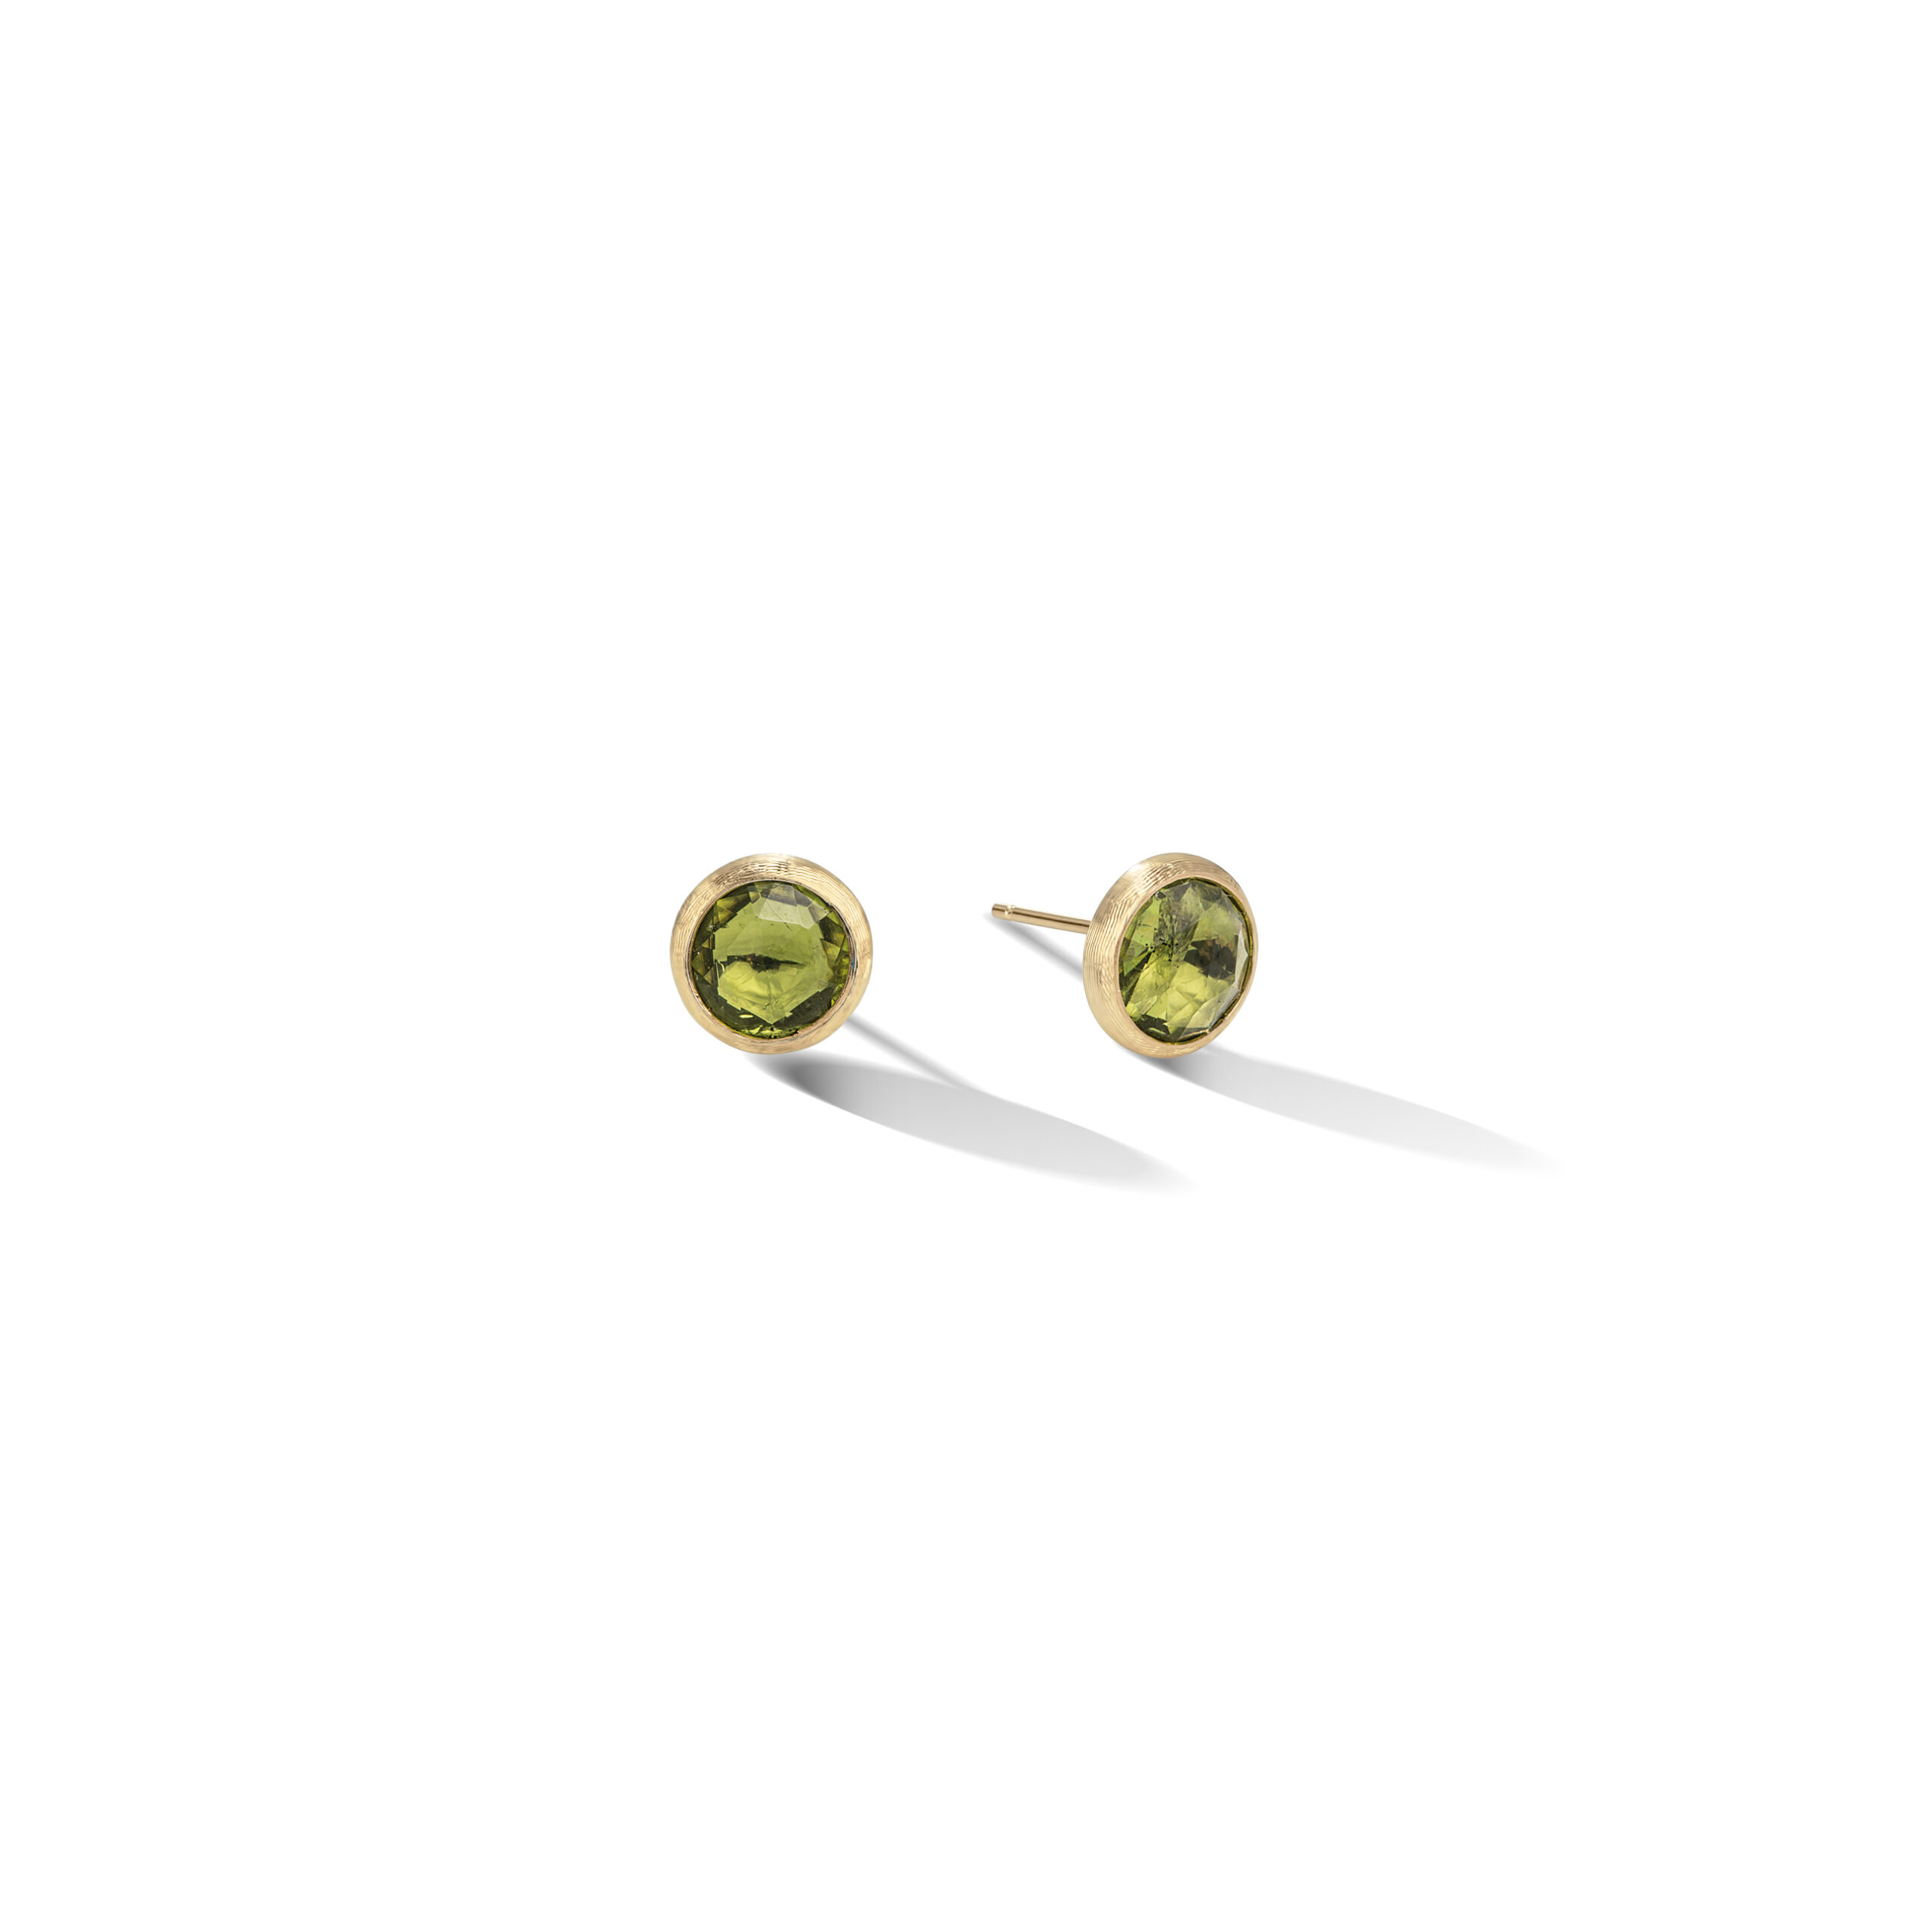 OB957 PR01 Y 02Marco Bicego Jaipur Color Collection 18k Yellow Gold Peridot Stud Earrings